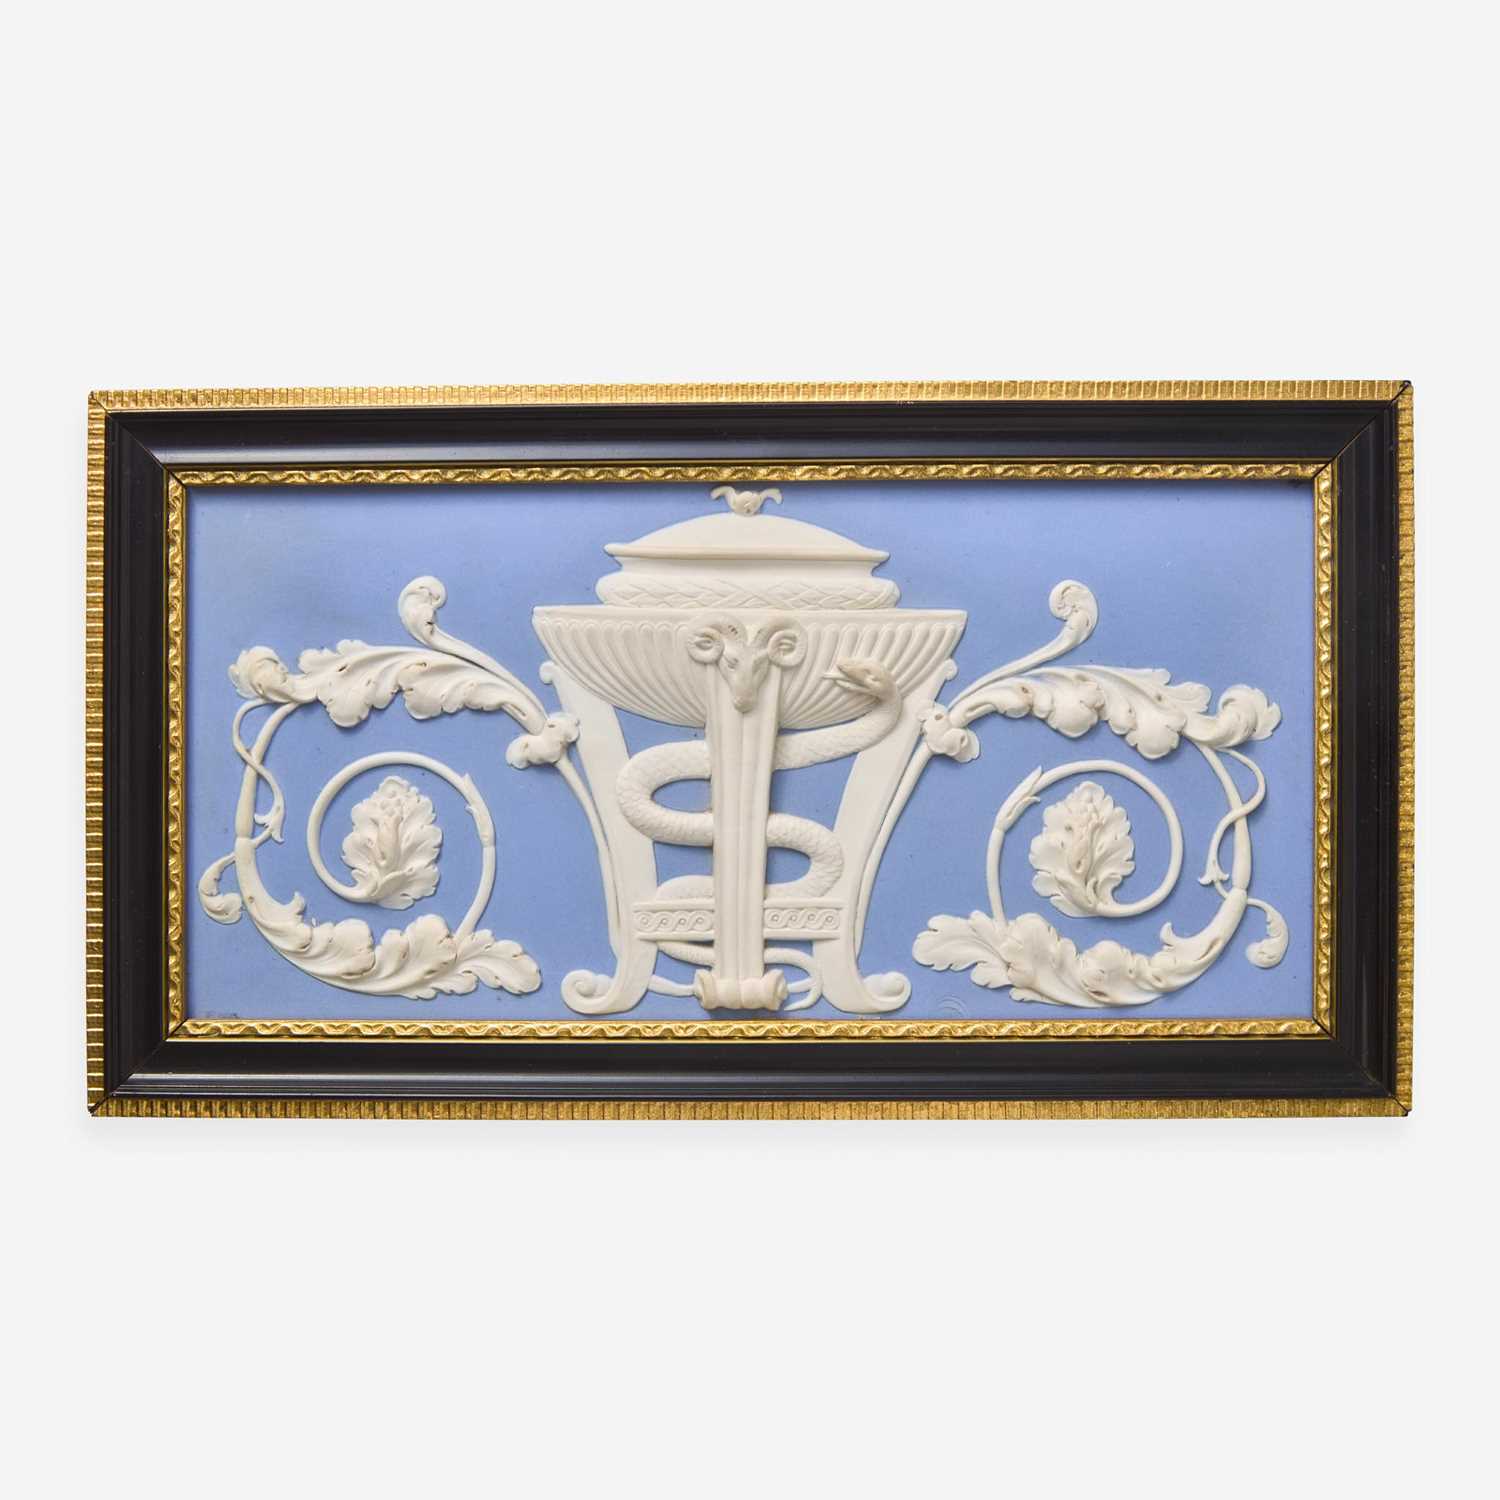 Lot 69 - A Wedgwood Solid Blue Jasperware Architectural Plaque